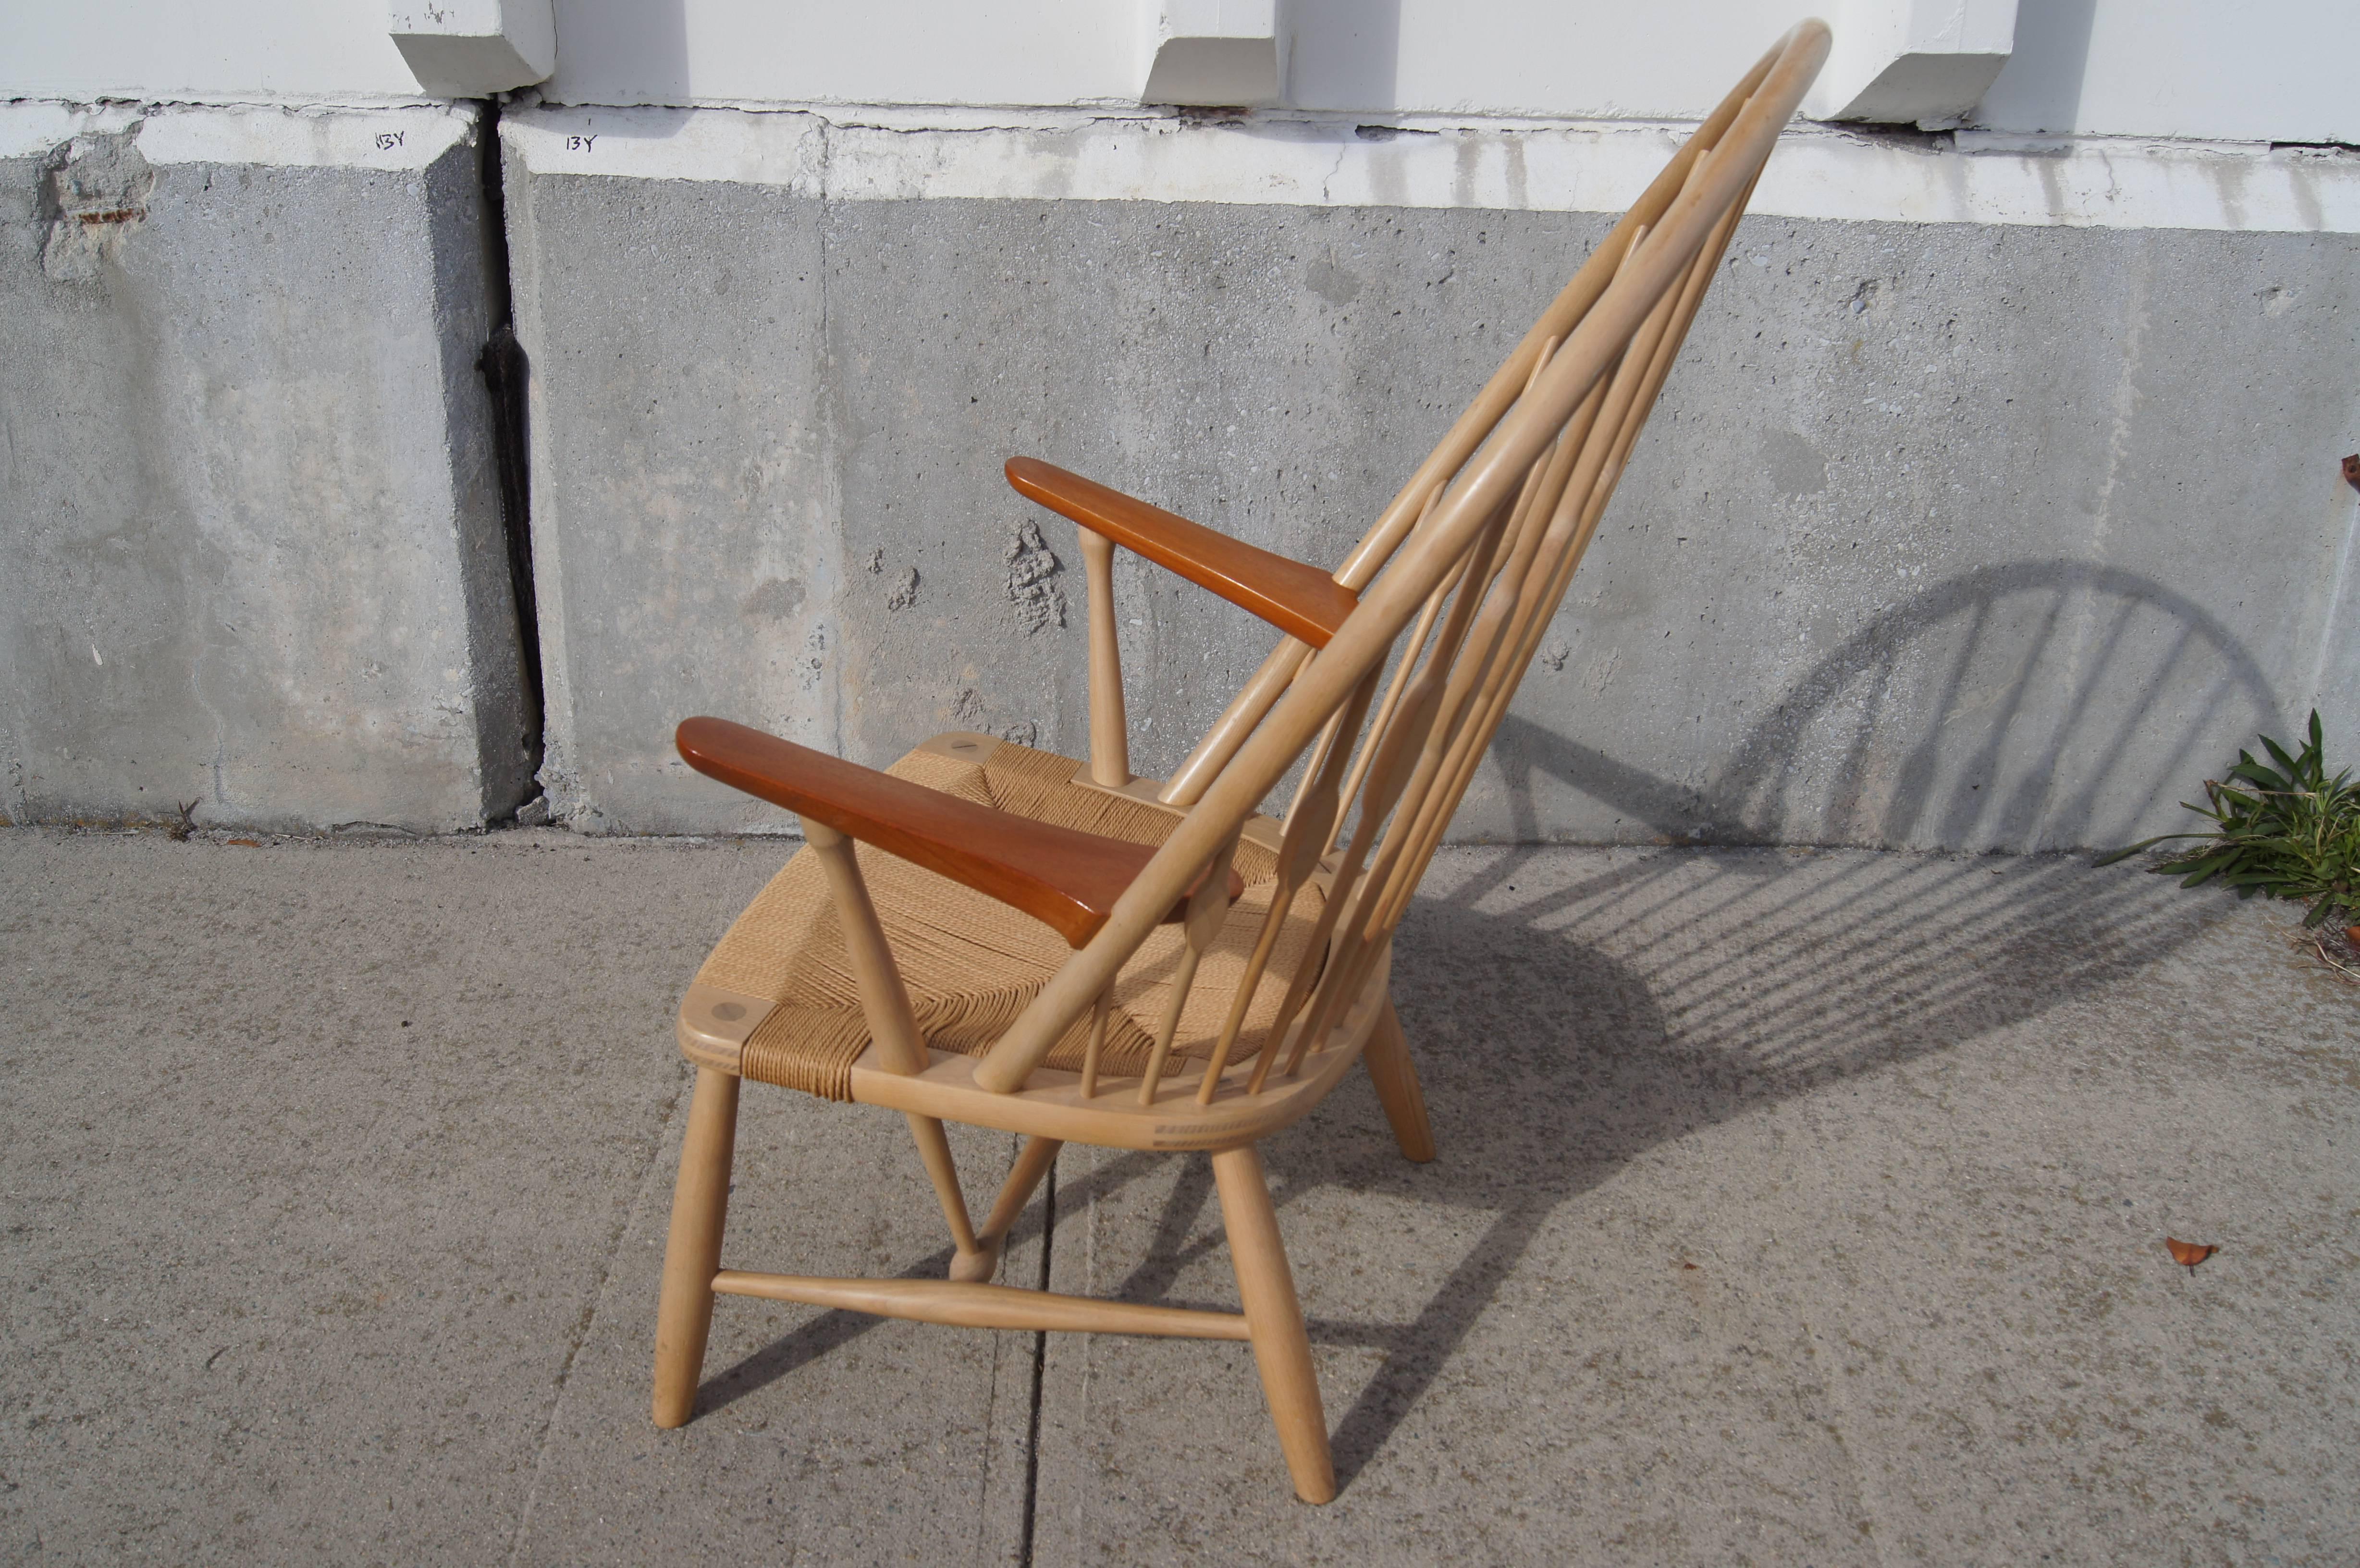 A modern, exaggerated take on the classic Windsor chair, this iconic design from 1947, model JH550, is a fine example of Hans Wegner’s work. Best known by the name given it by fellow Danish designer Finn Juhl, the Peacock chair features a solid ash